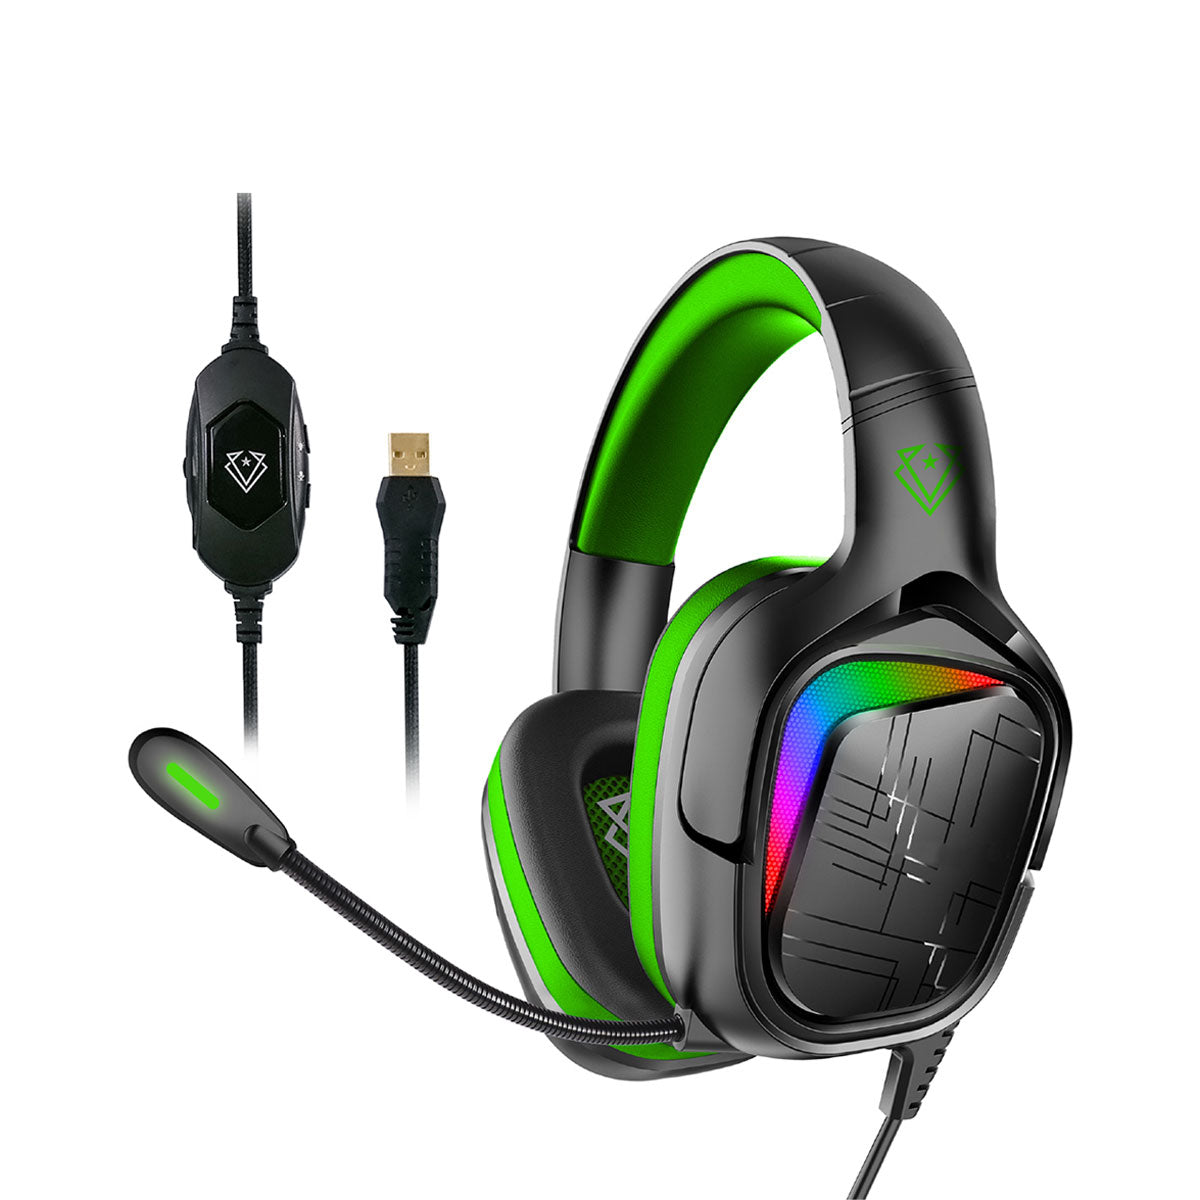 High Performance 7.1 Stereo Sound Pro Gaming Headset